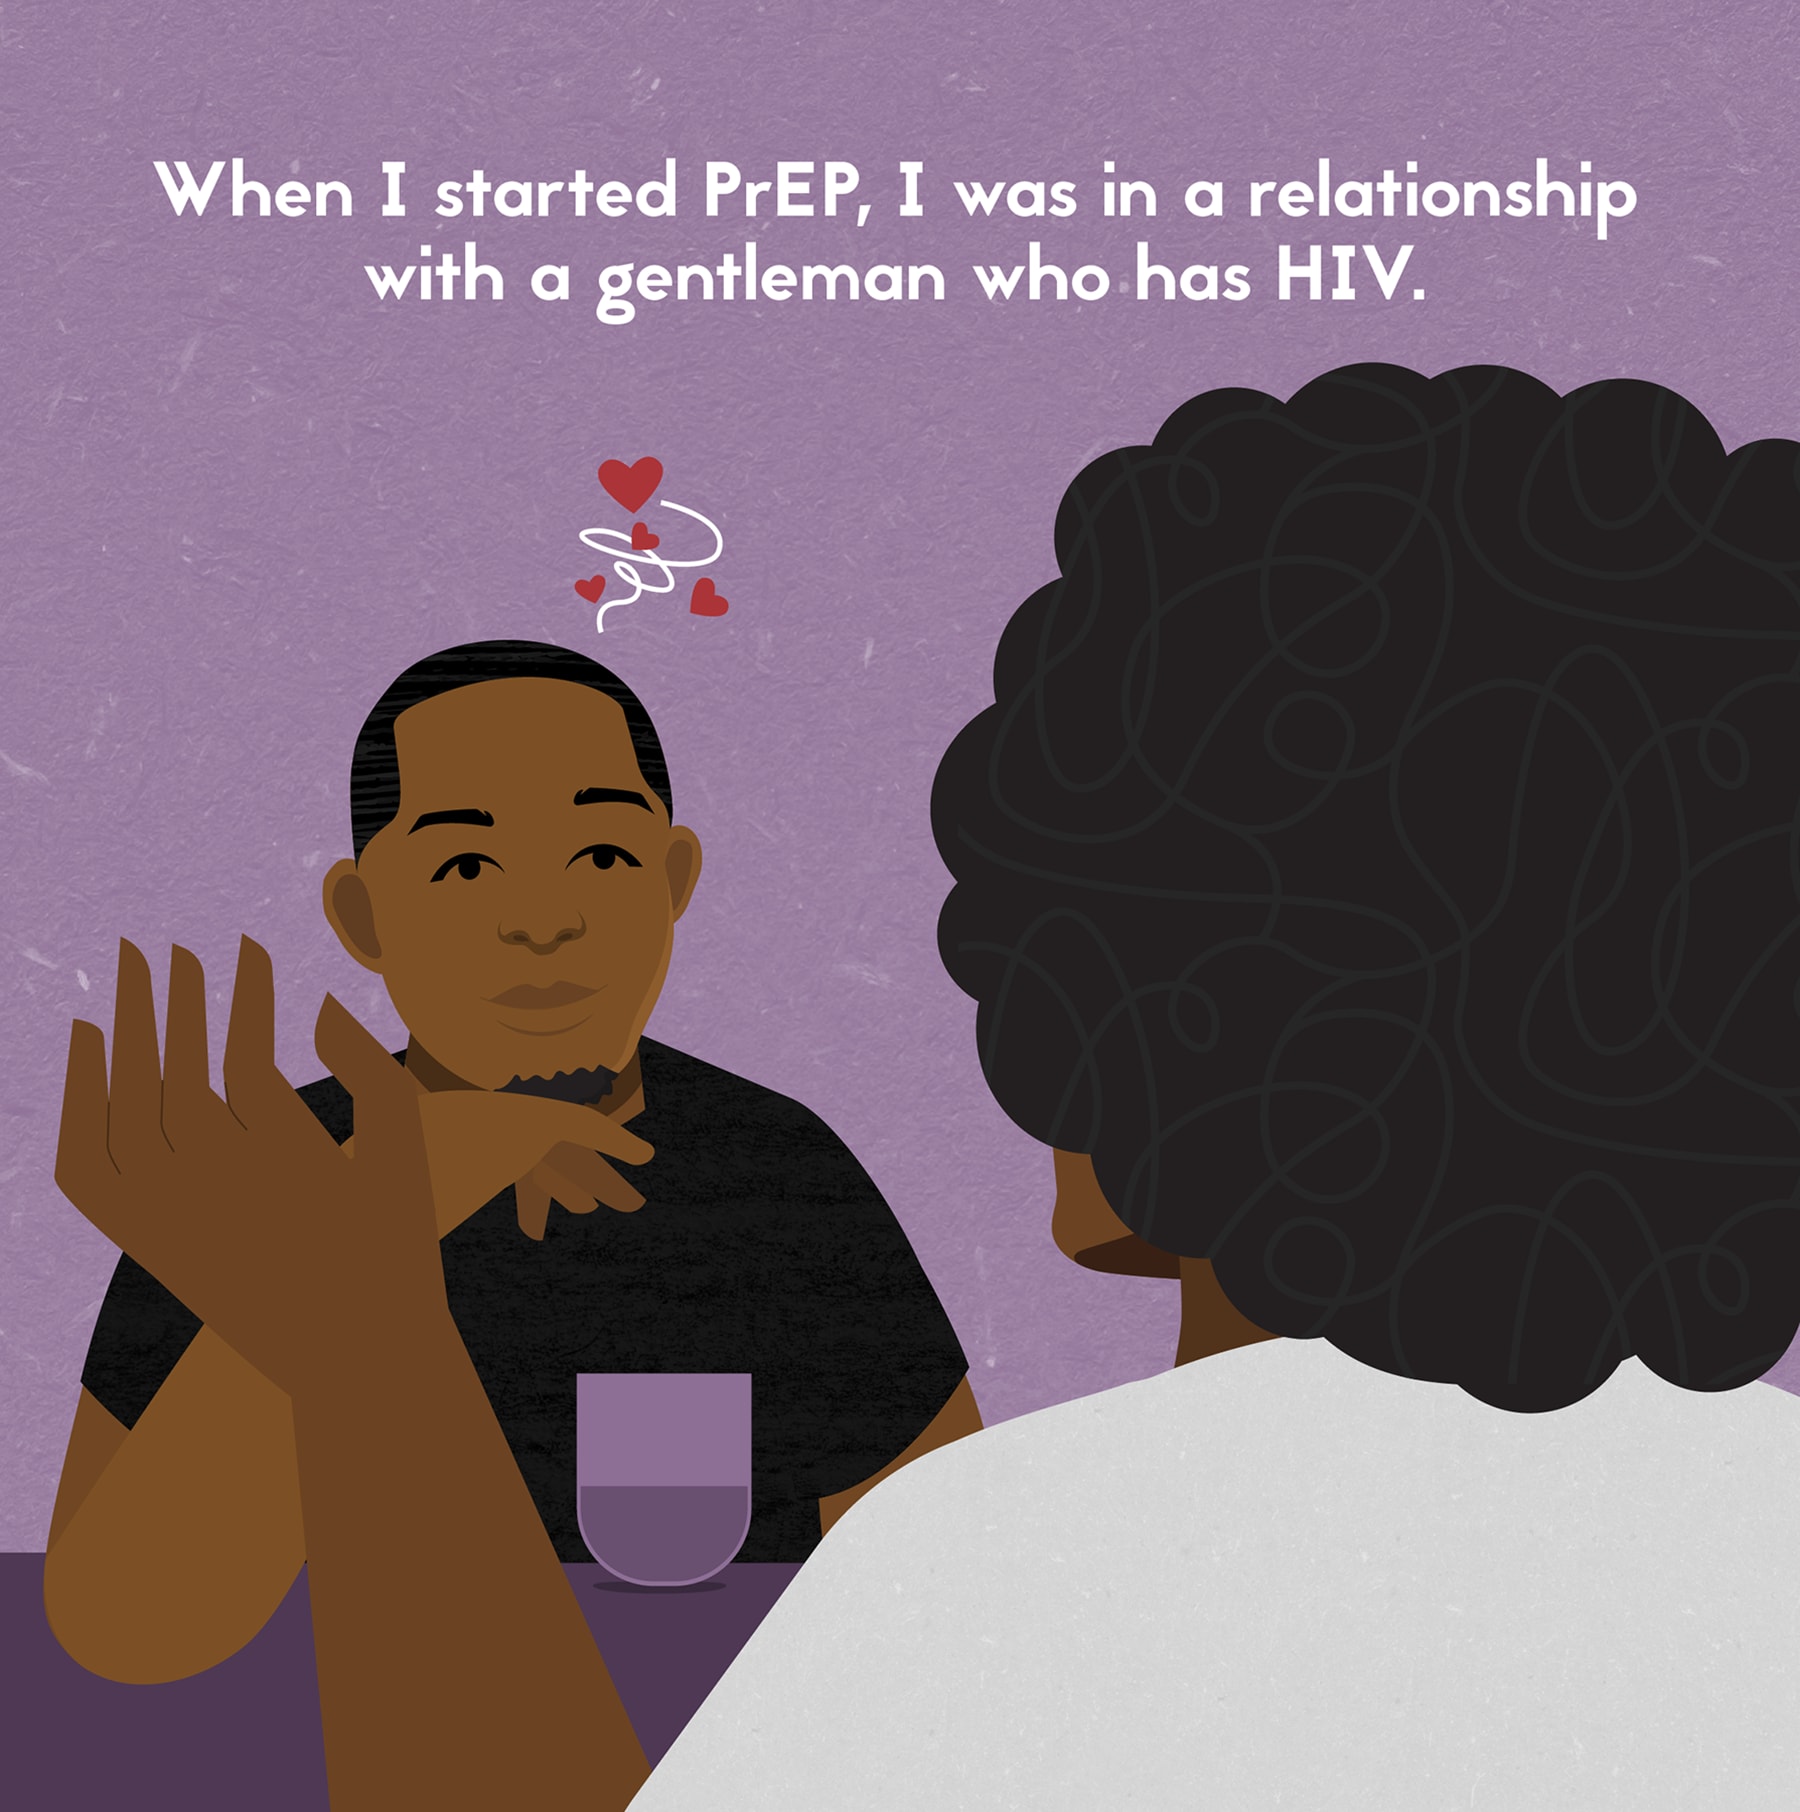 When I started PrEP, I was in a relationship.